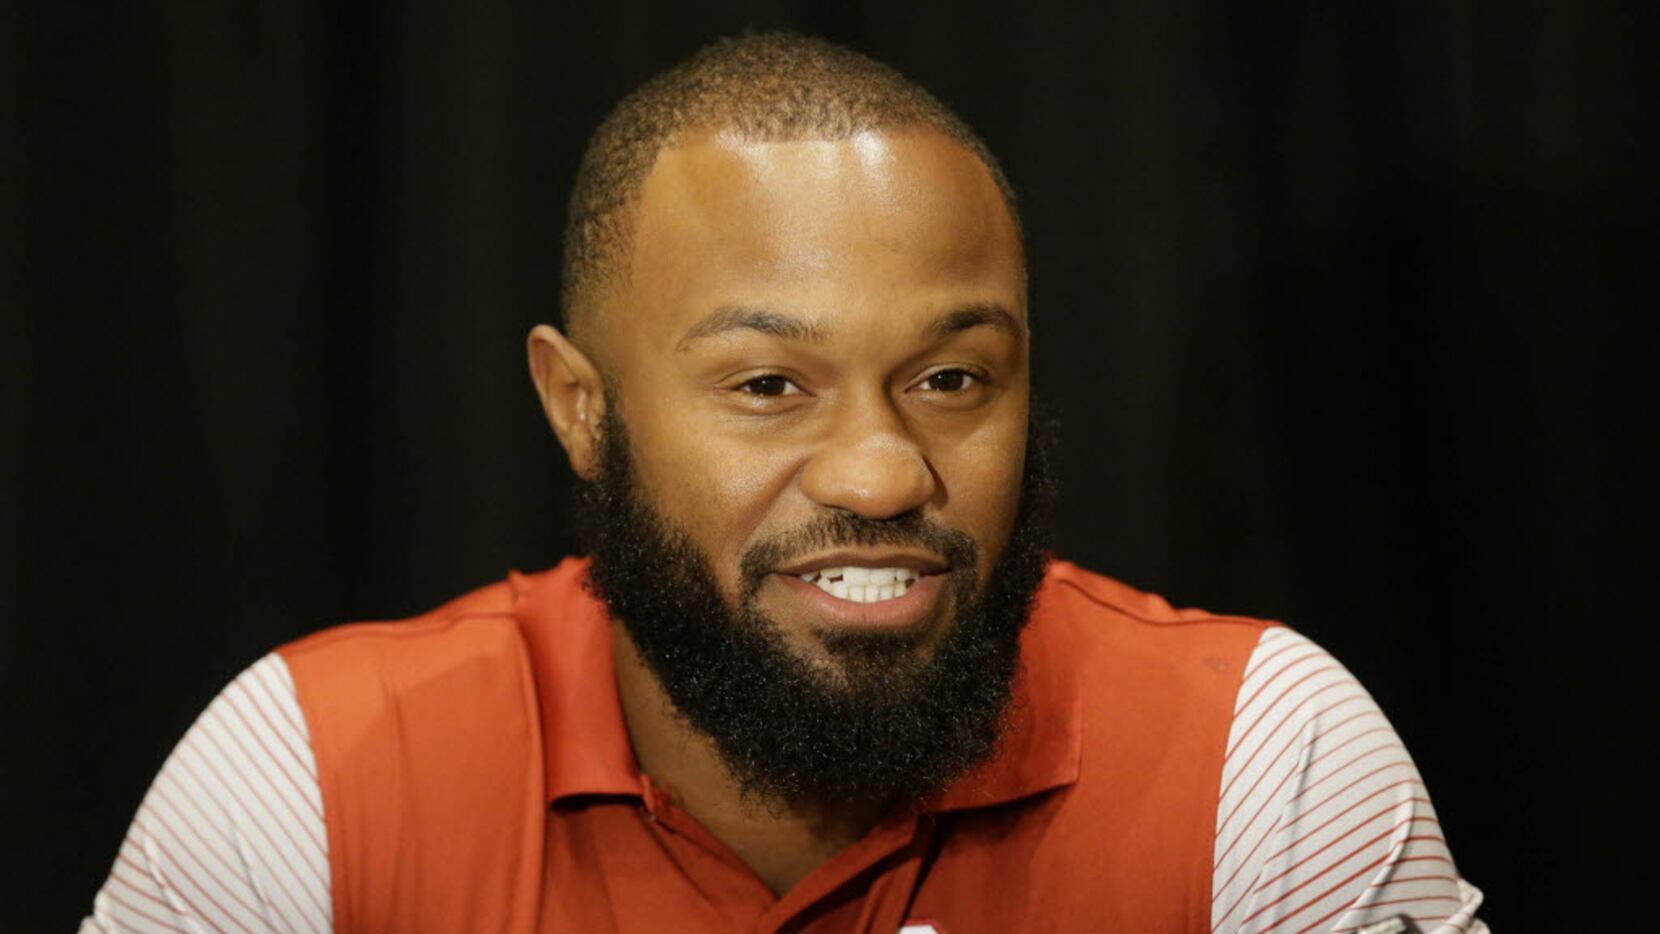 WATCH: Oklahoma RB Samaje Perine proposes to his girlfriend with the help  of a magician